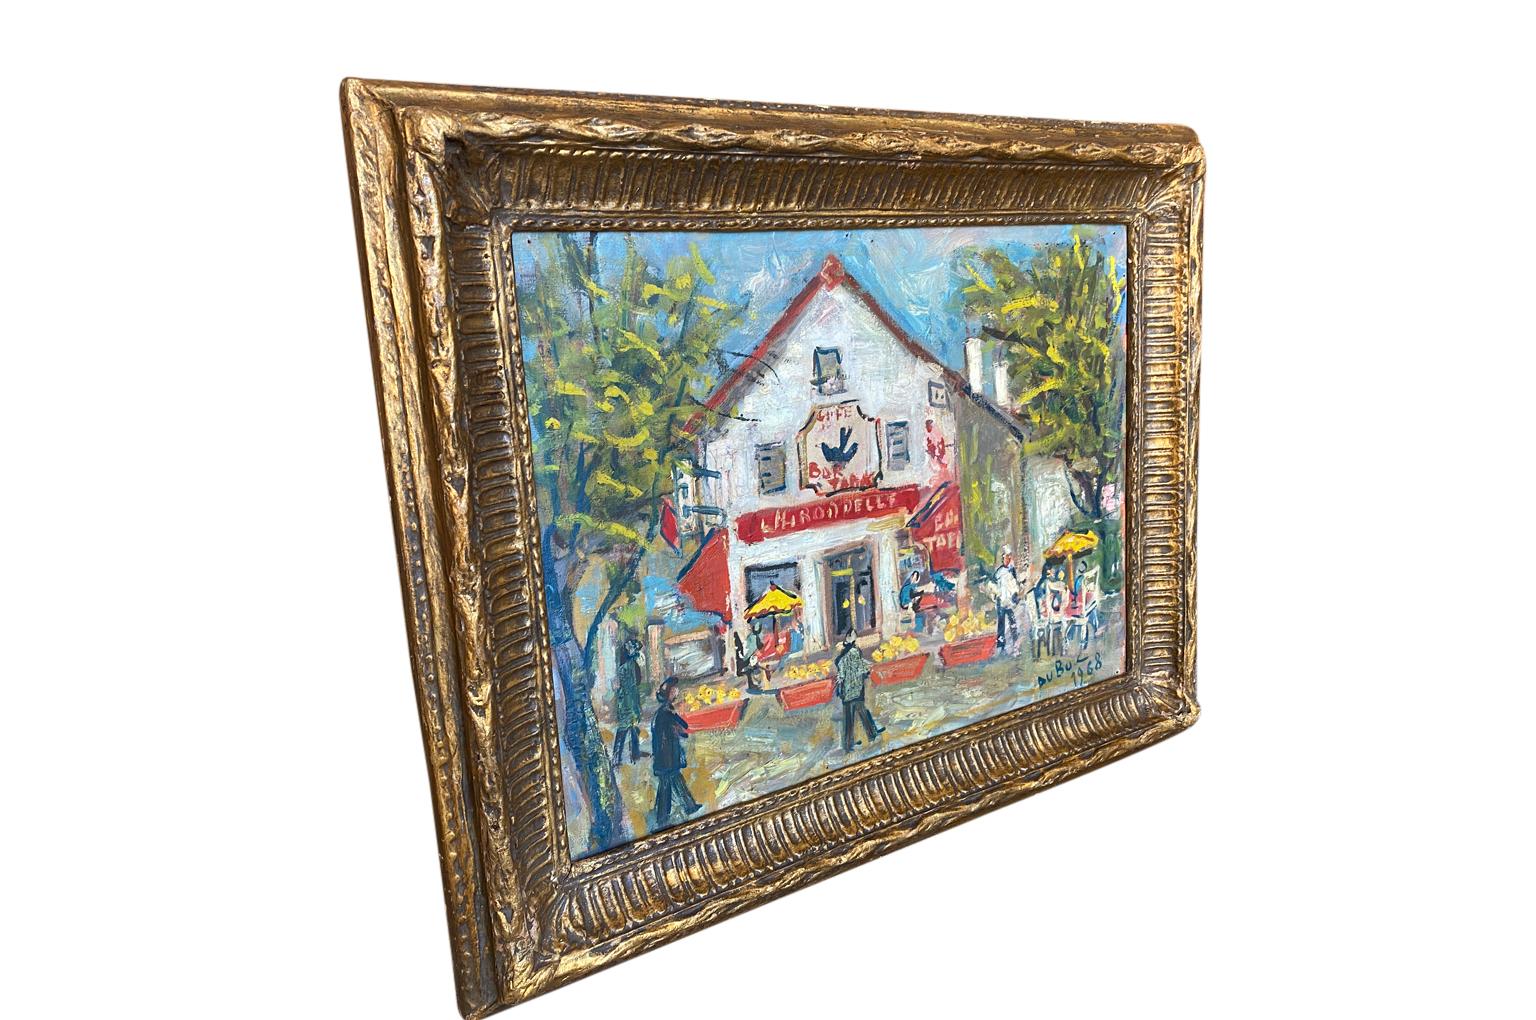 A very delighted oil on canvas painting by Roland Dubuc (1924 - 1998). A charming scene of the Cafe Bar Tabac - L'Irrondelle - Cafe The Swallow. Lively bright colors and wonderful brushwork. Housed in a stunning frame made from papier mache.